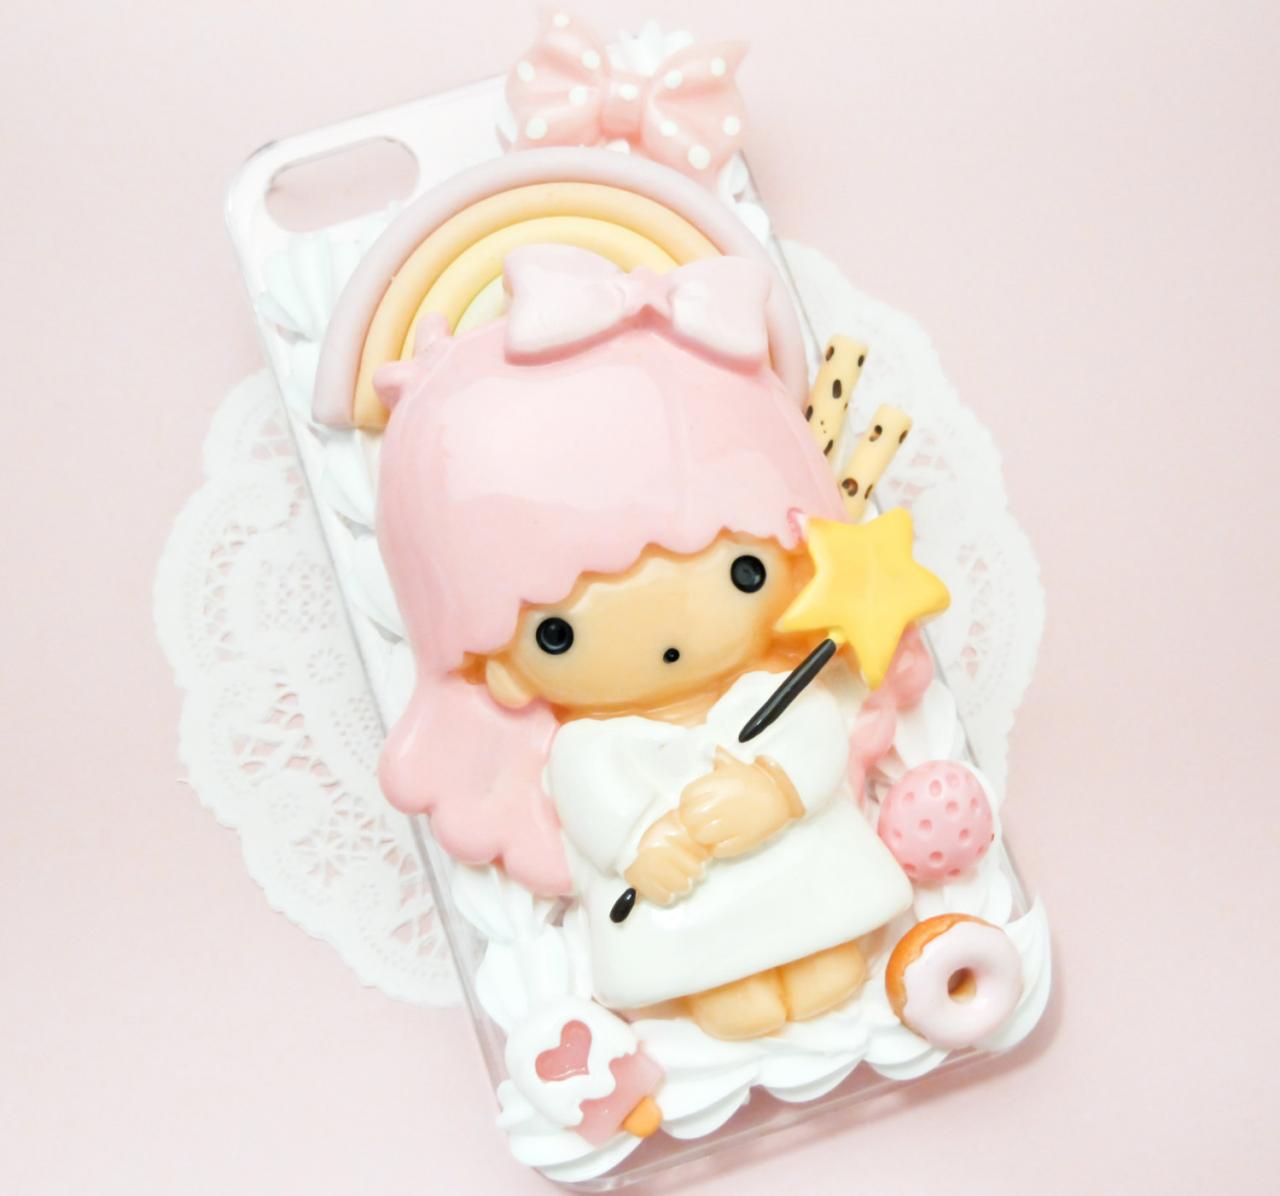 Made To Order Little Twin Star Lala Sweet Rainbow Pink Whipped Cream Handmade Custom Iphone Samsung Decoden Case